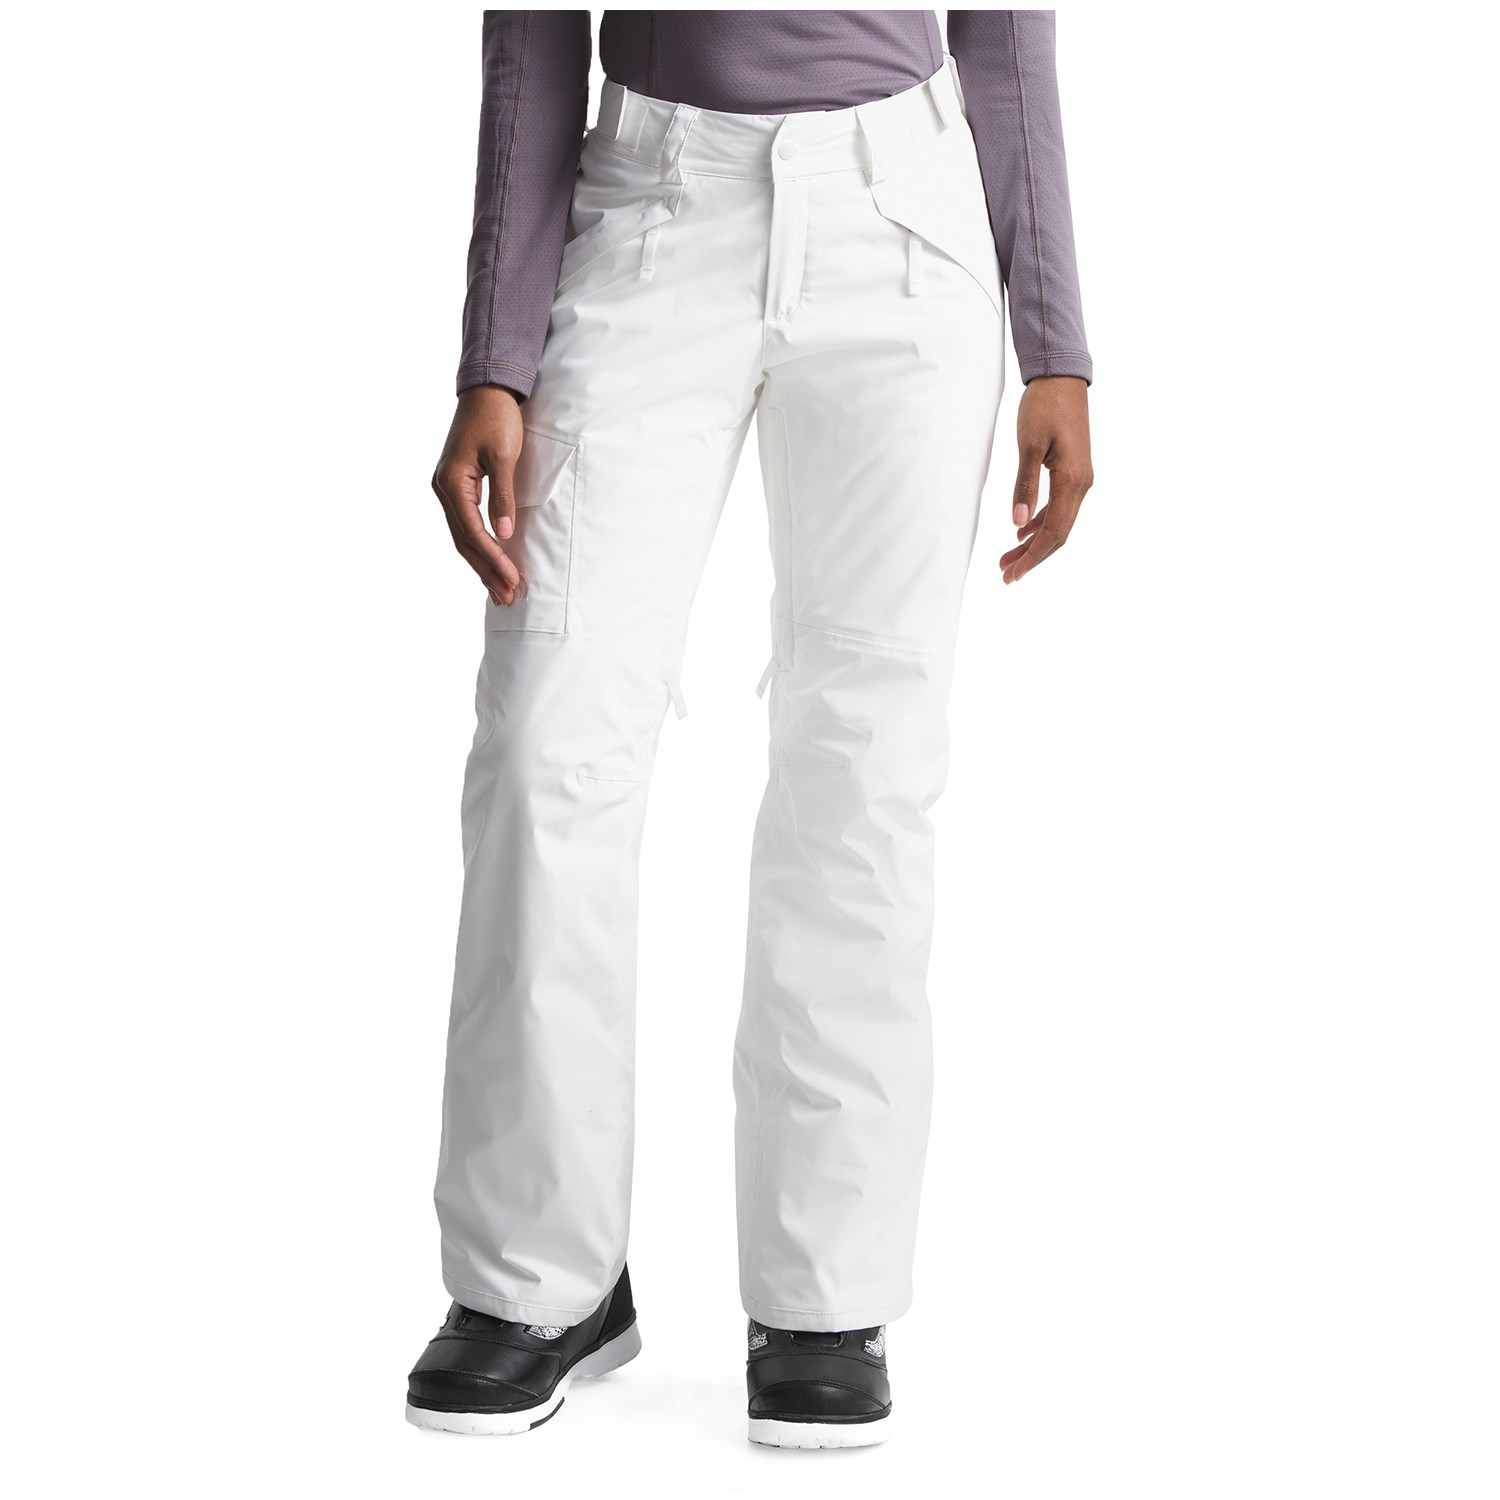 north face women's freedom pants